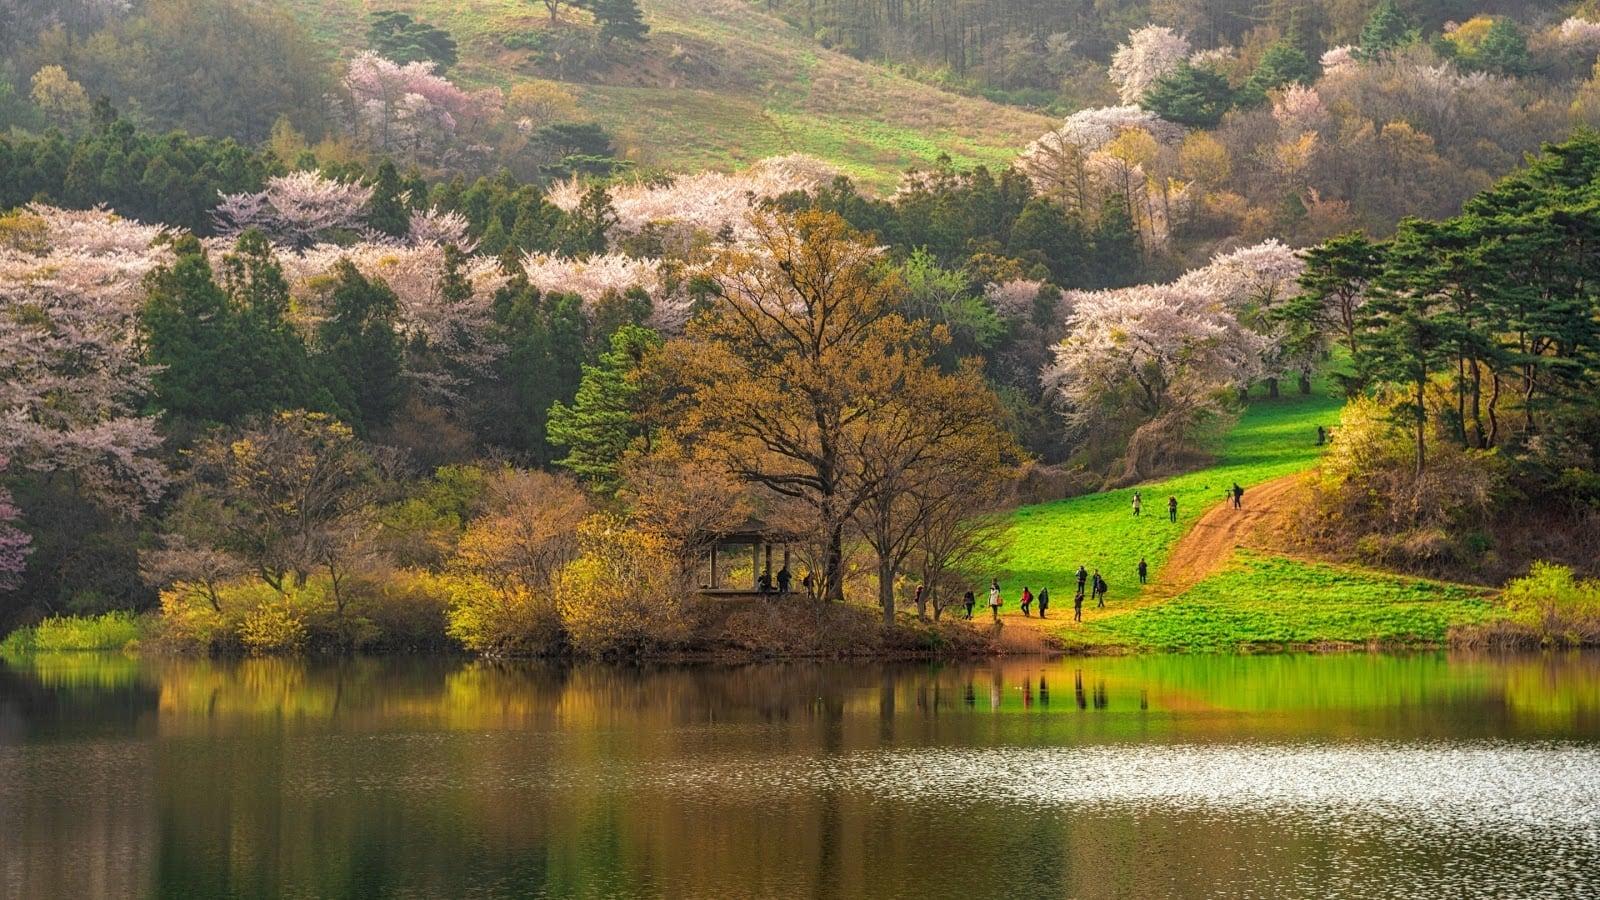 Spring and Fall are the best times to visit South Korea